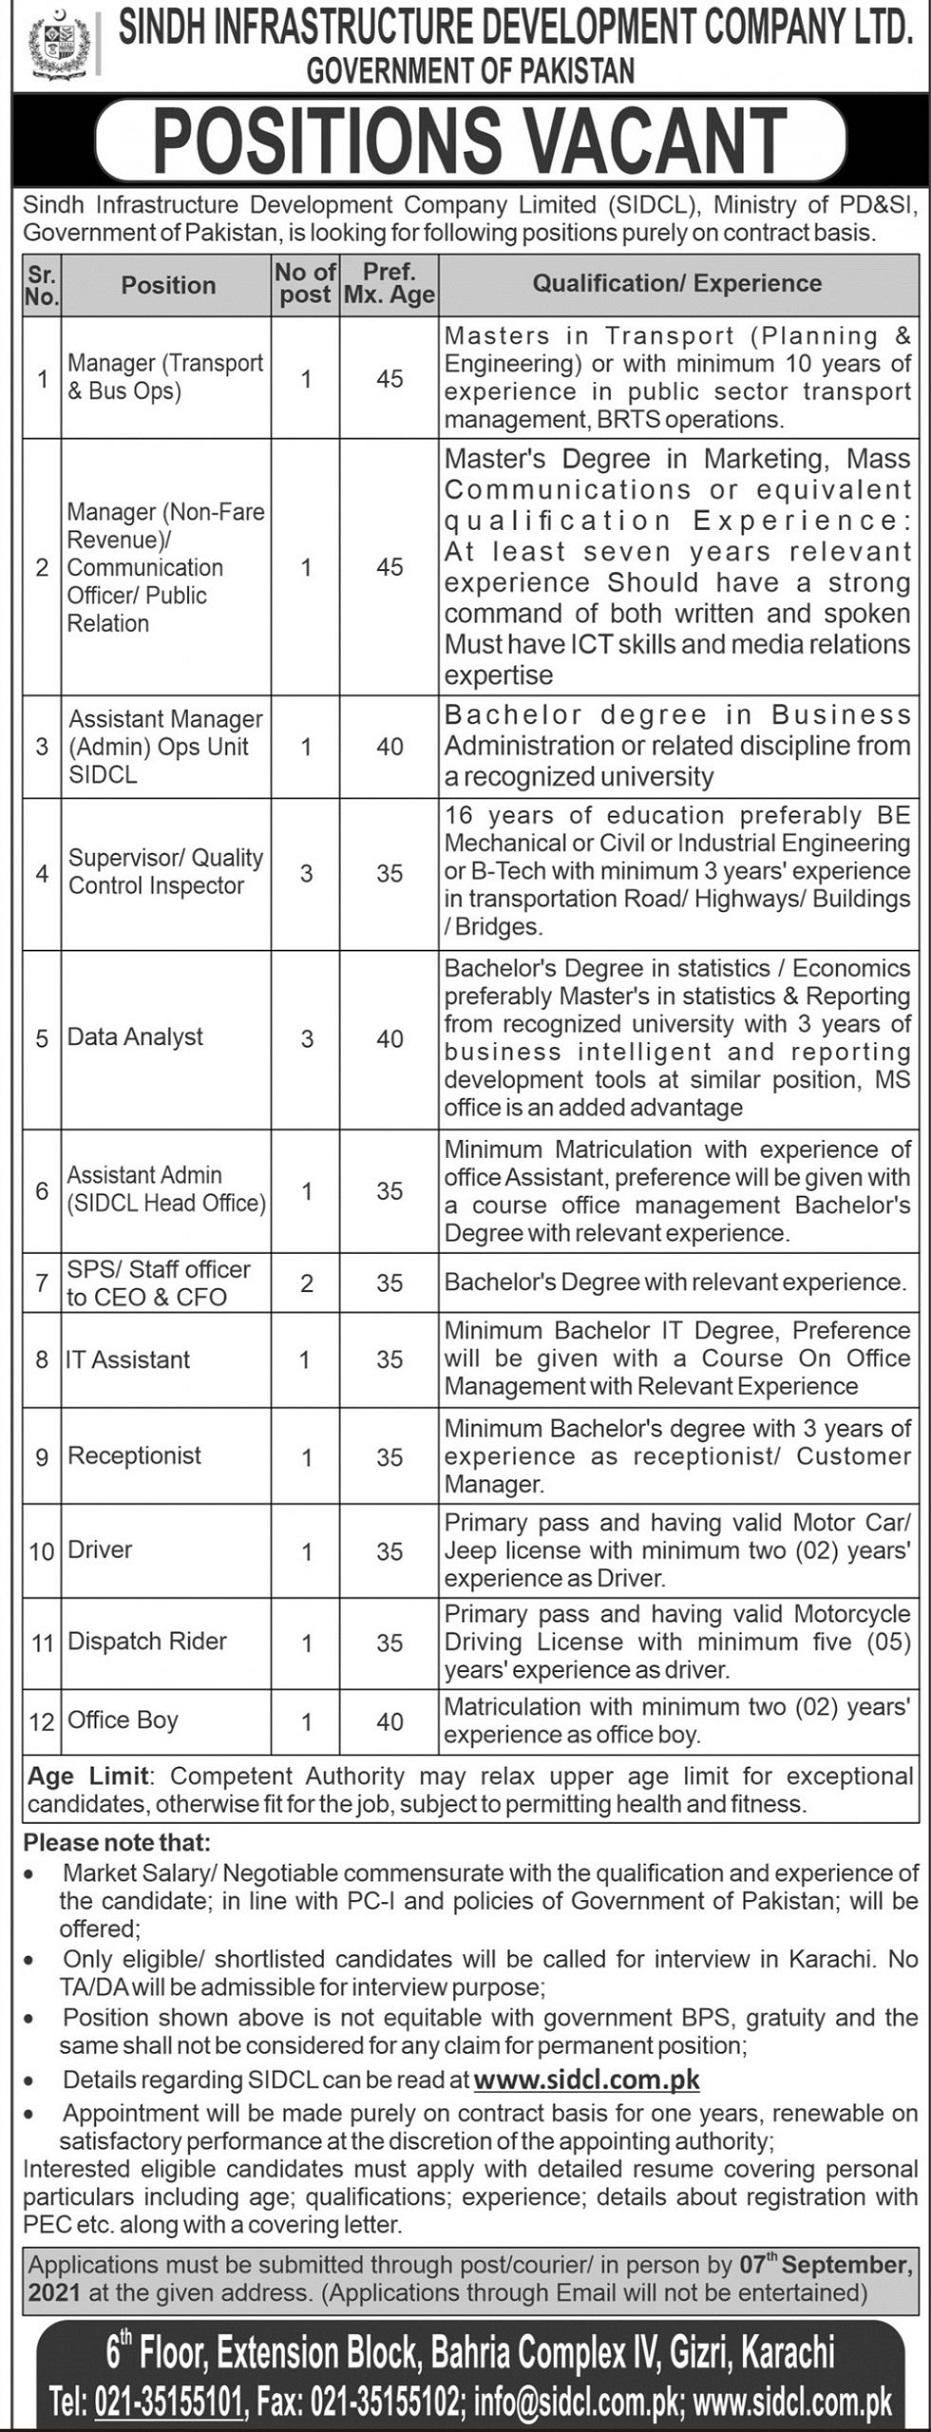 Sindh Infrastructure Development Company Limited SIDCL Karachi Jobs 2021